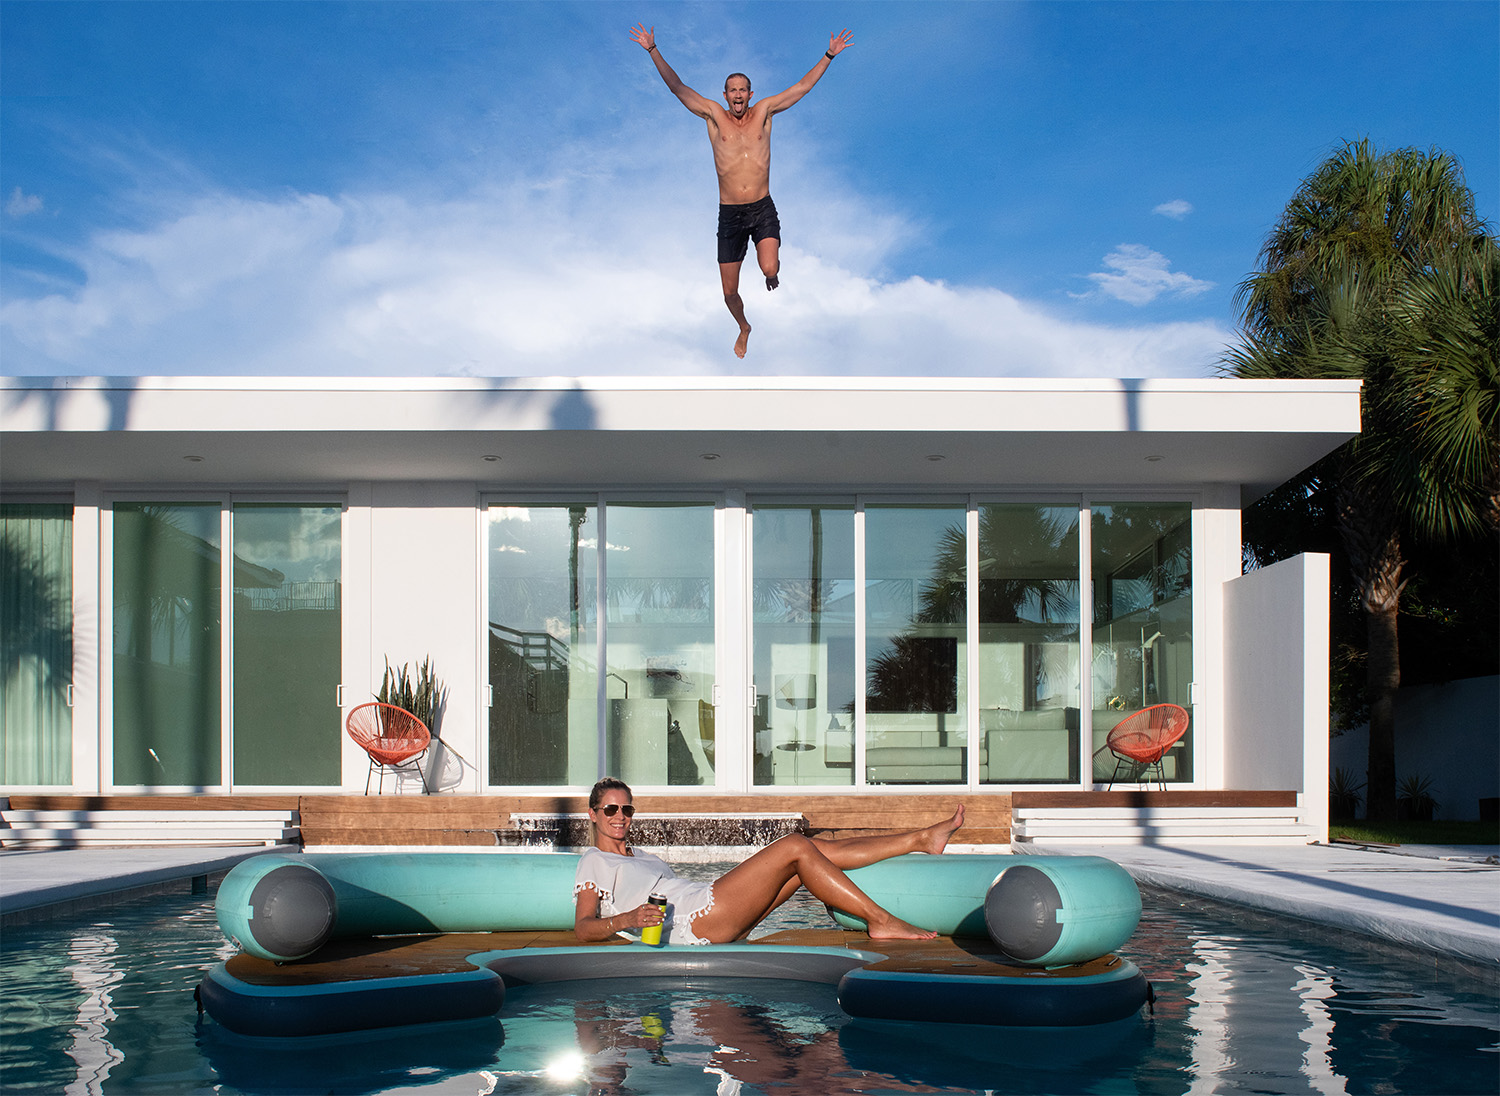 Corey Cooper jumps off the roof of his house into a pool below where Magda Cooper is floating on a raft